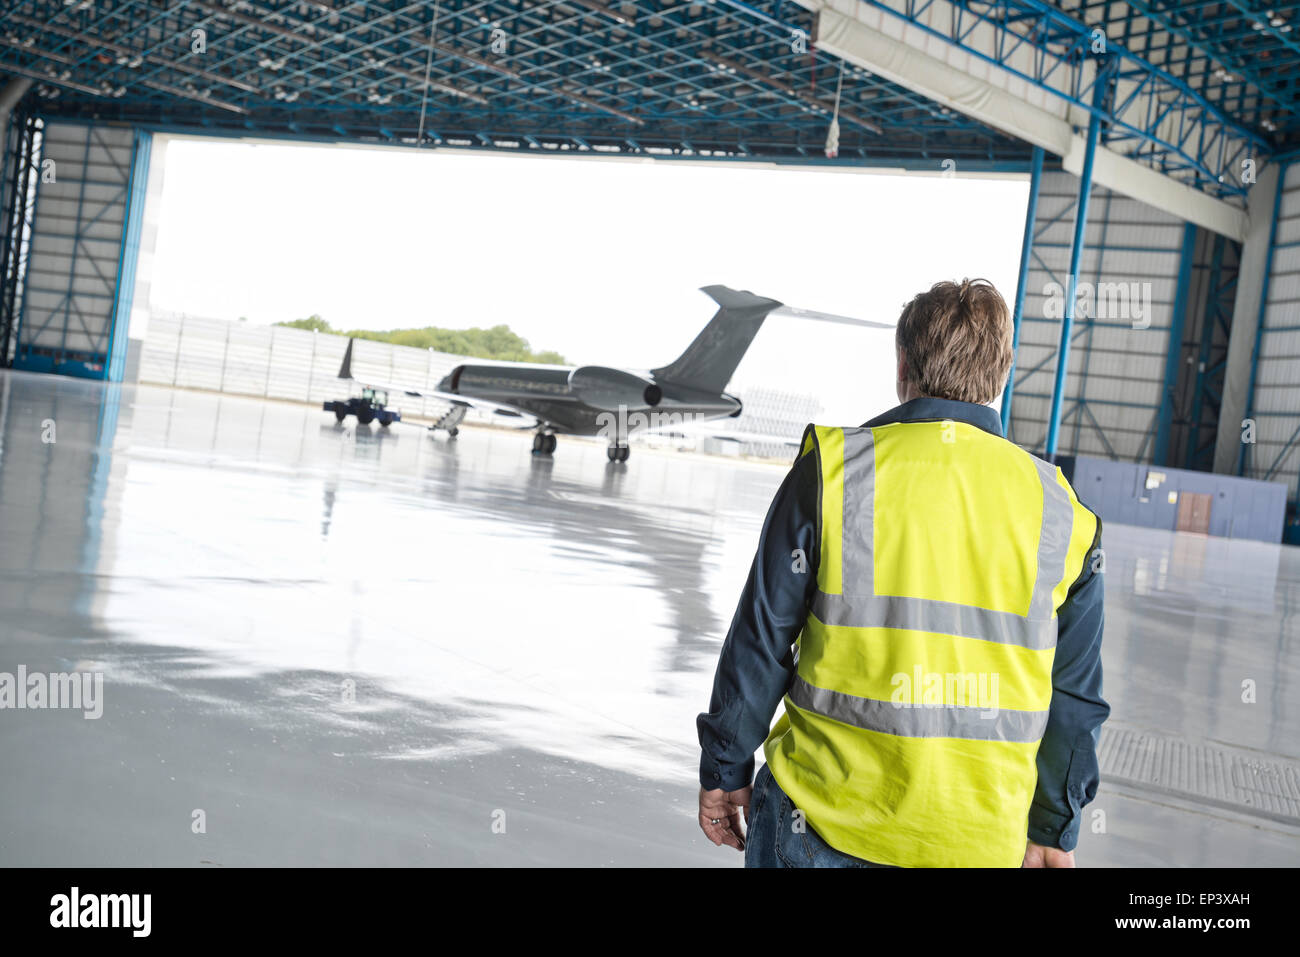 Ground crew approaching a private jet in a hanger being prepared for a flight Stock Photo